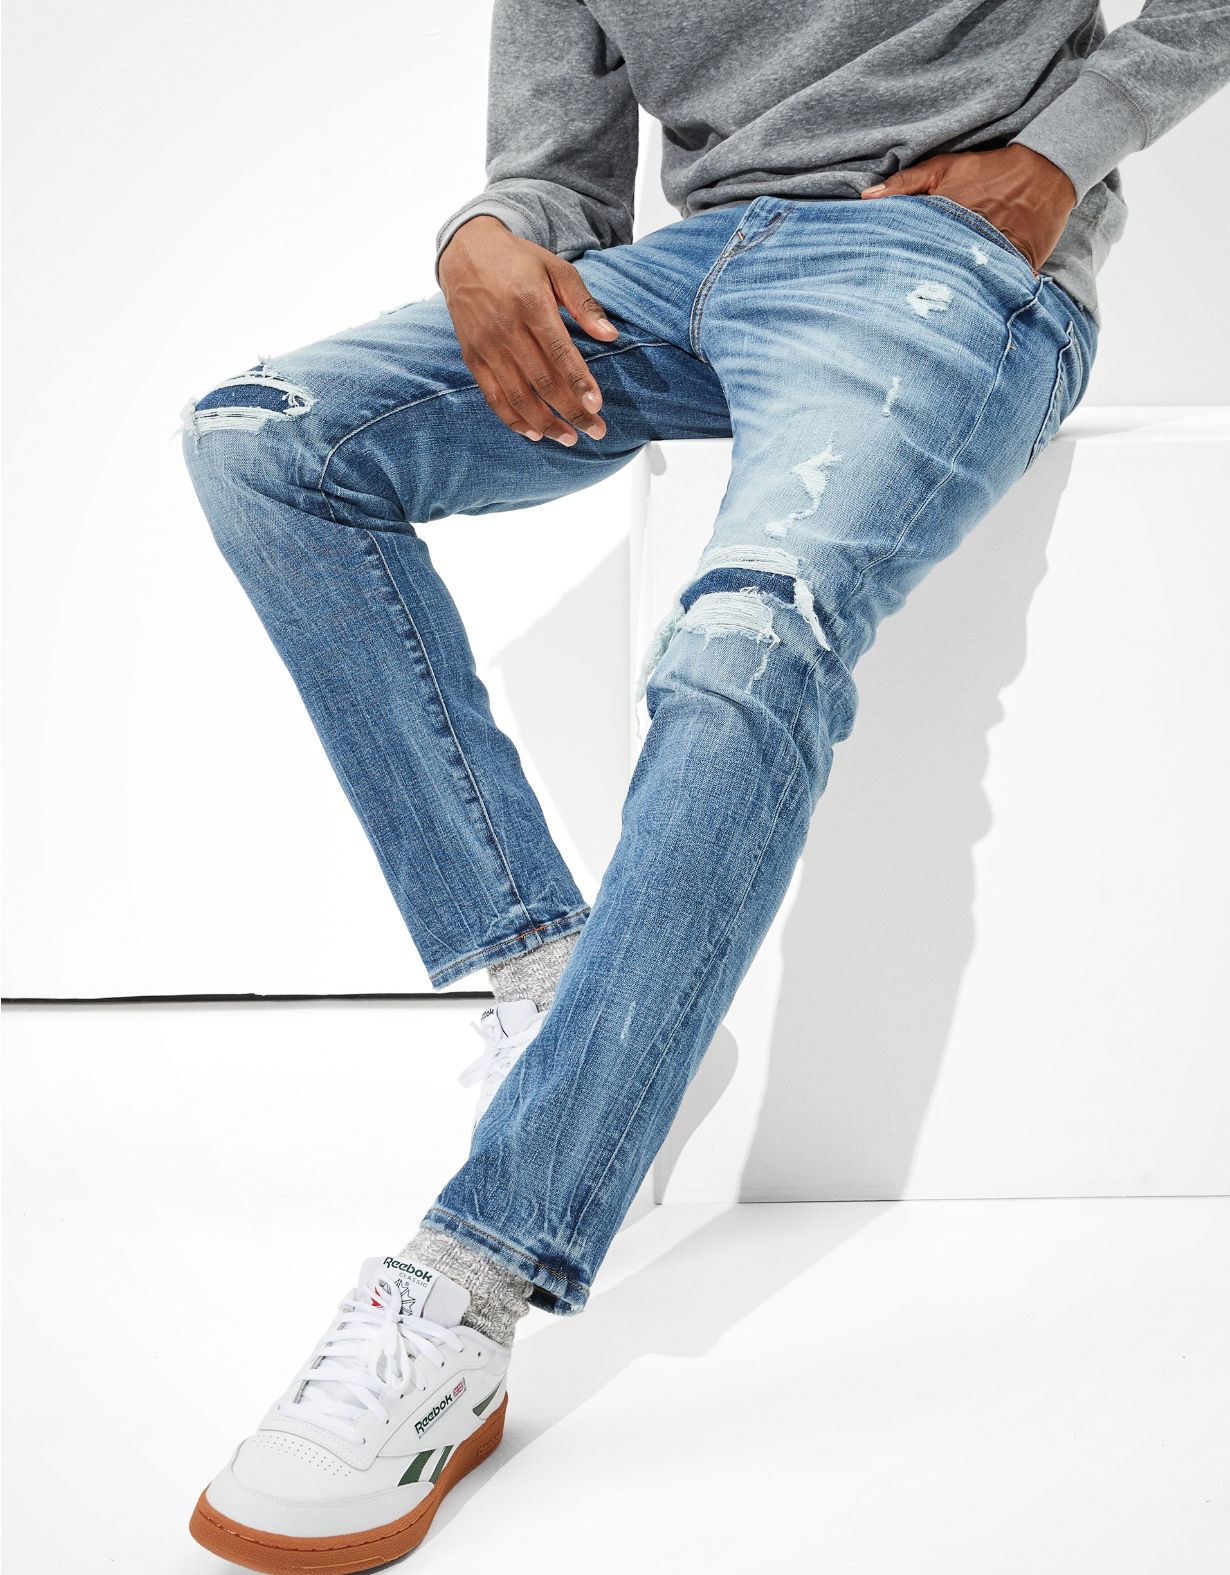 AE AirFlex+ Temp Tech Patched Athletic Fit Jean